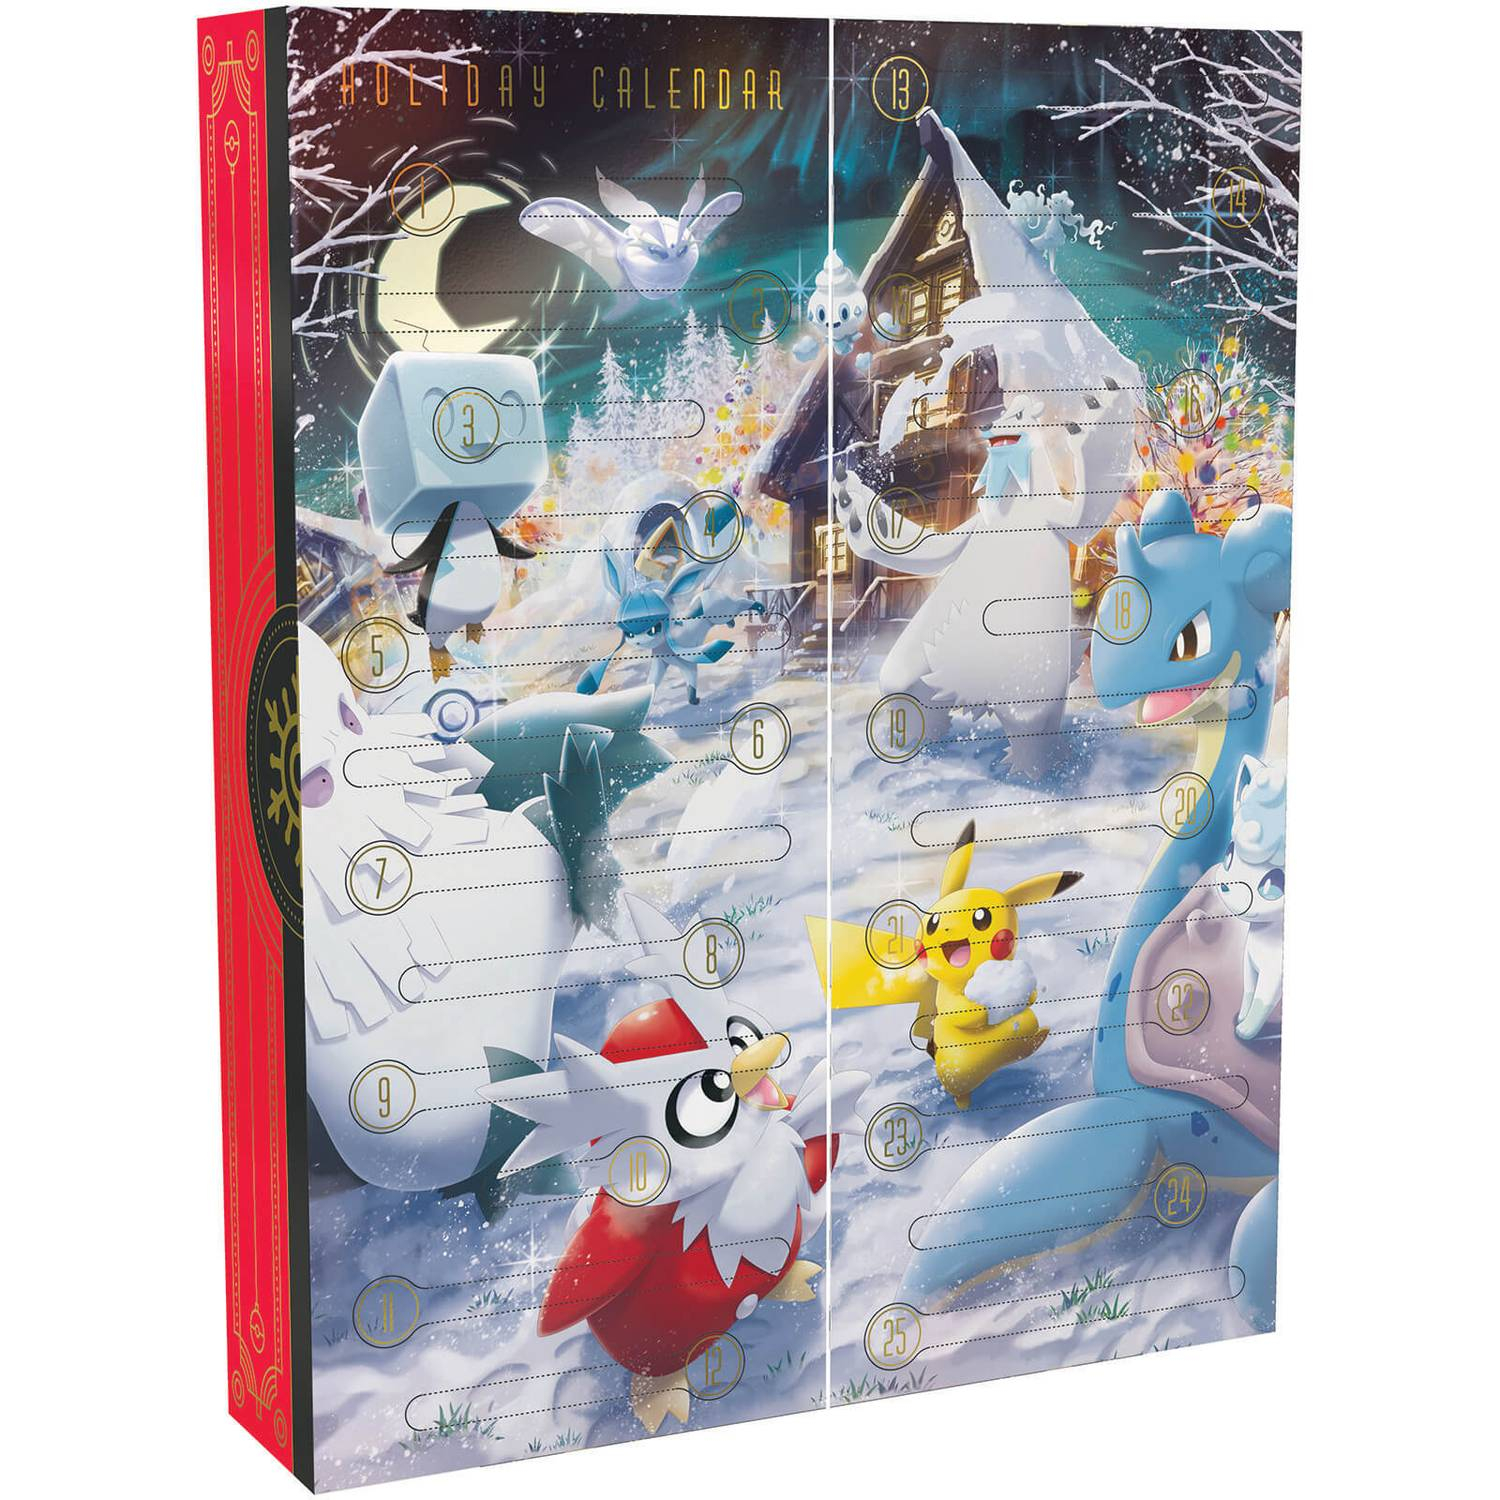 quot Pokemon TCG Holiday Calendar quot Promos and Contents Revealed